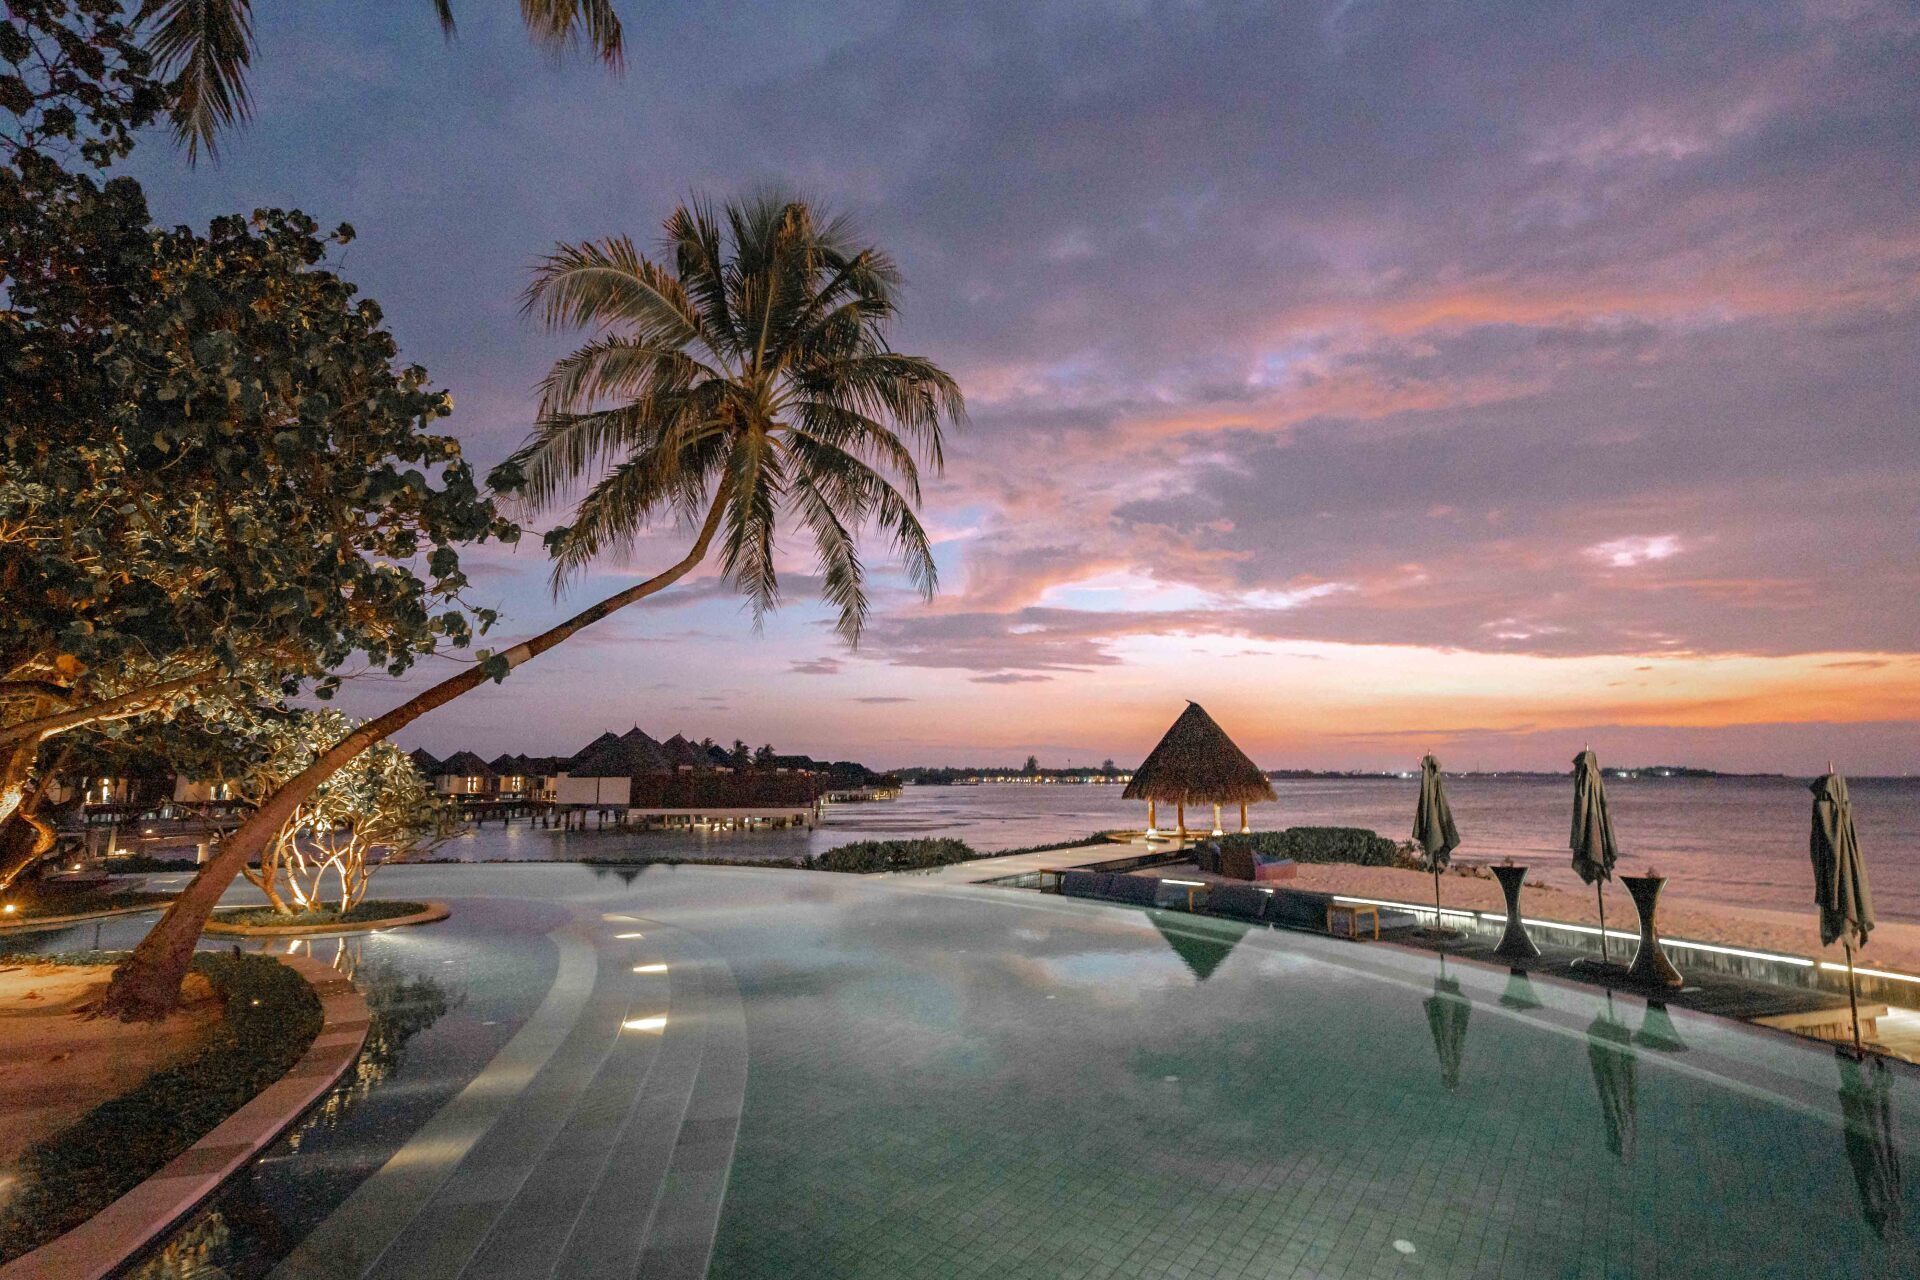 An infinity pool surrounded by palm trees and umbrellas overlooking the ocean at sunset